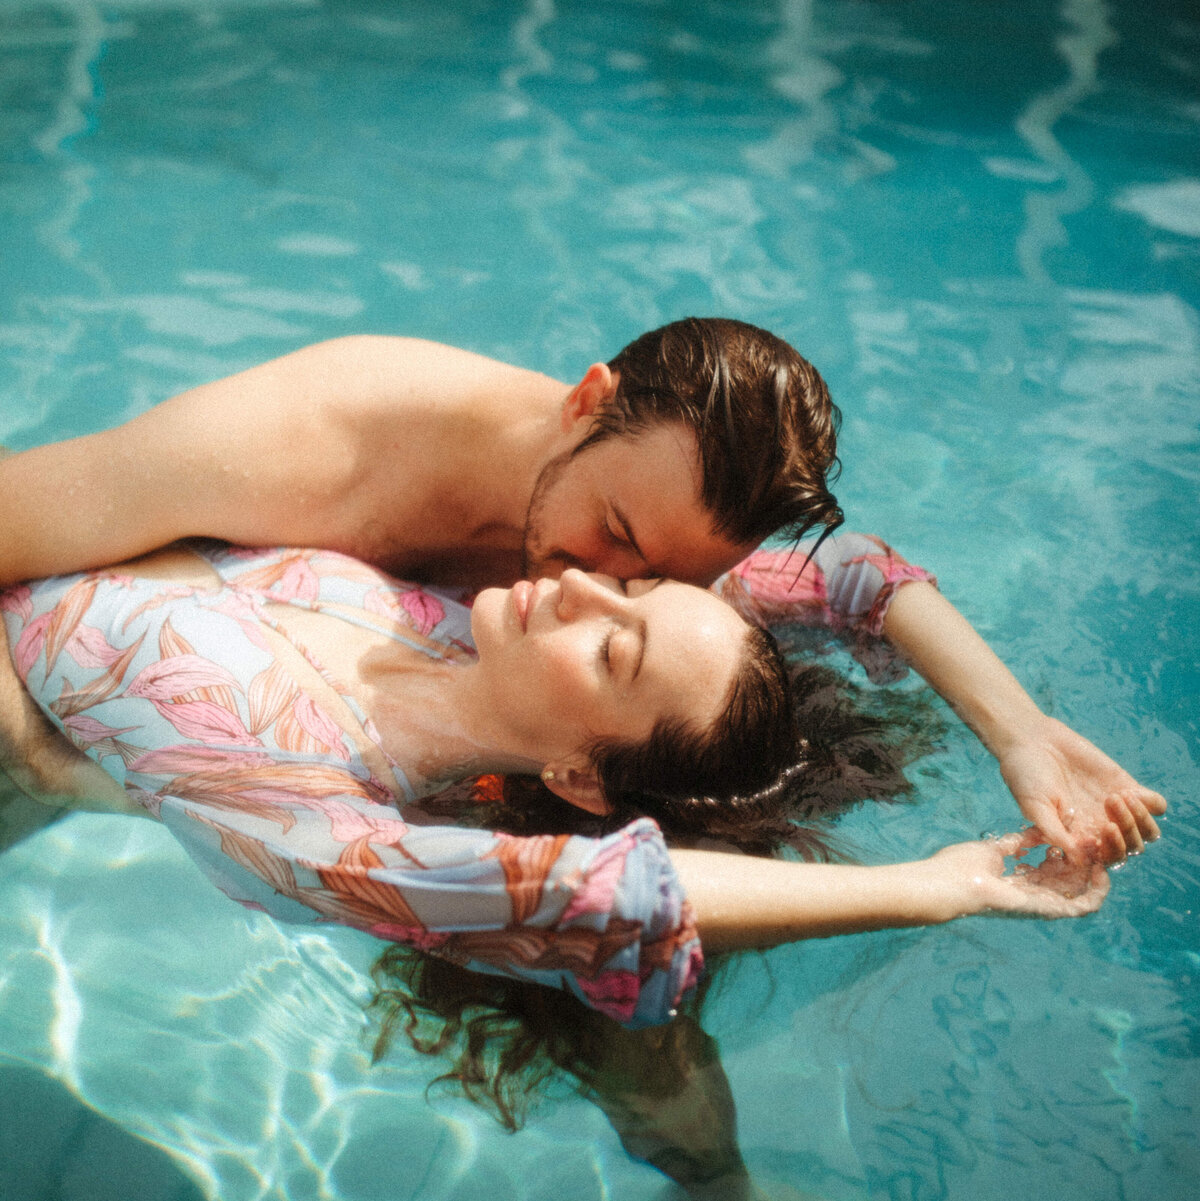 A girl in a vintage swimsuit is floating in a swimming pool while a guy is holding her and kissing her.